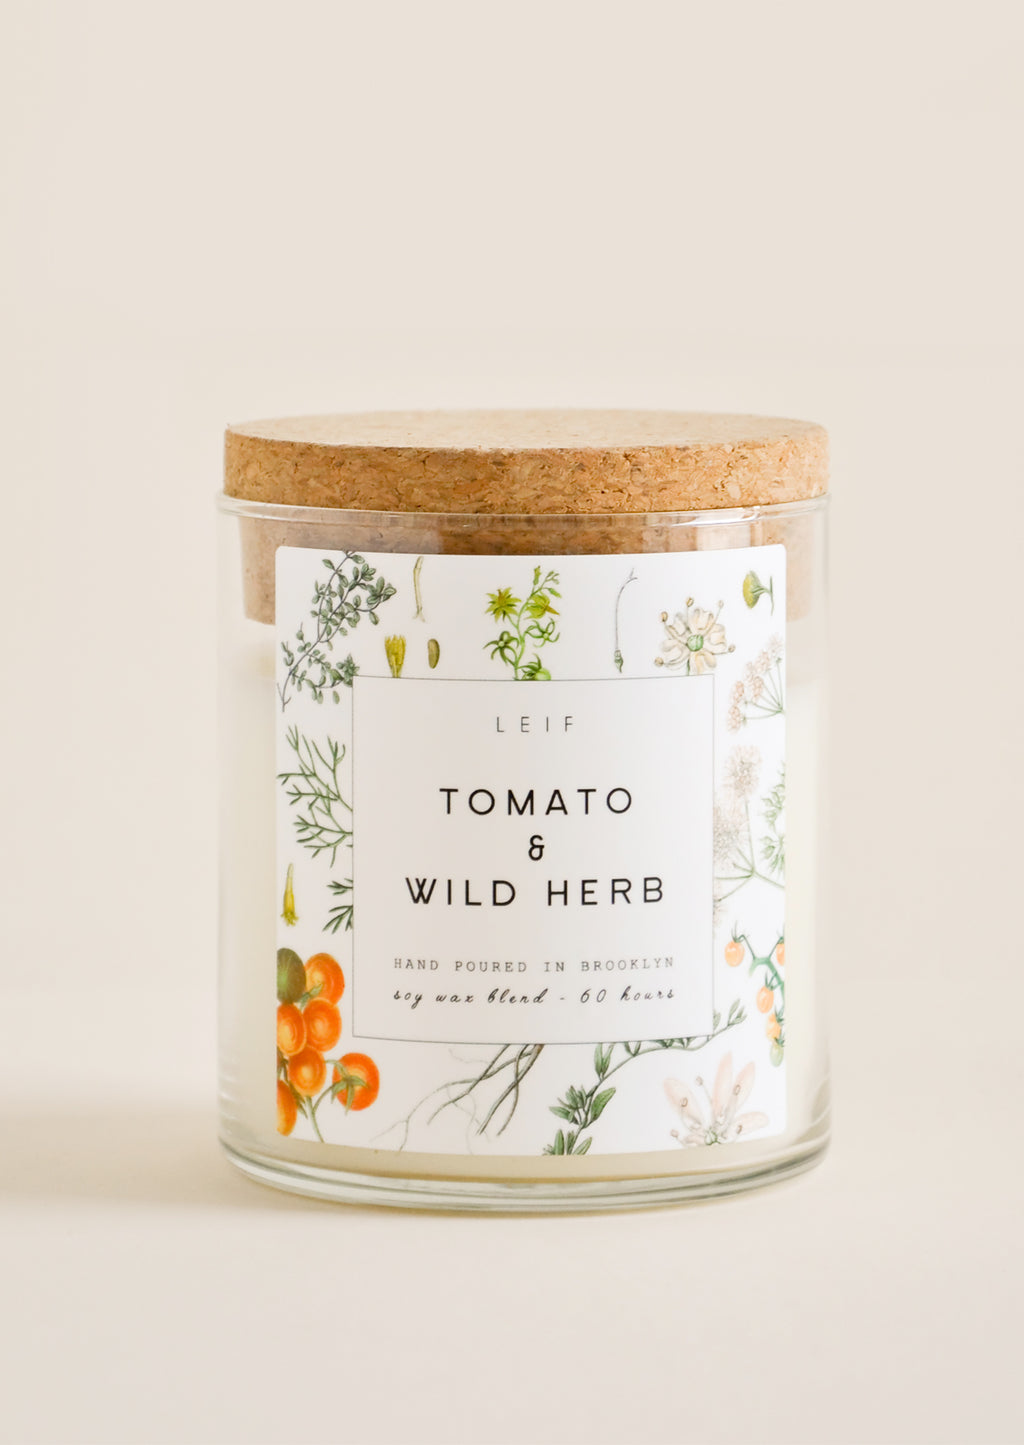 Wick Stickers for Candle Making  Wild Herb Soap Co – Wild Herb